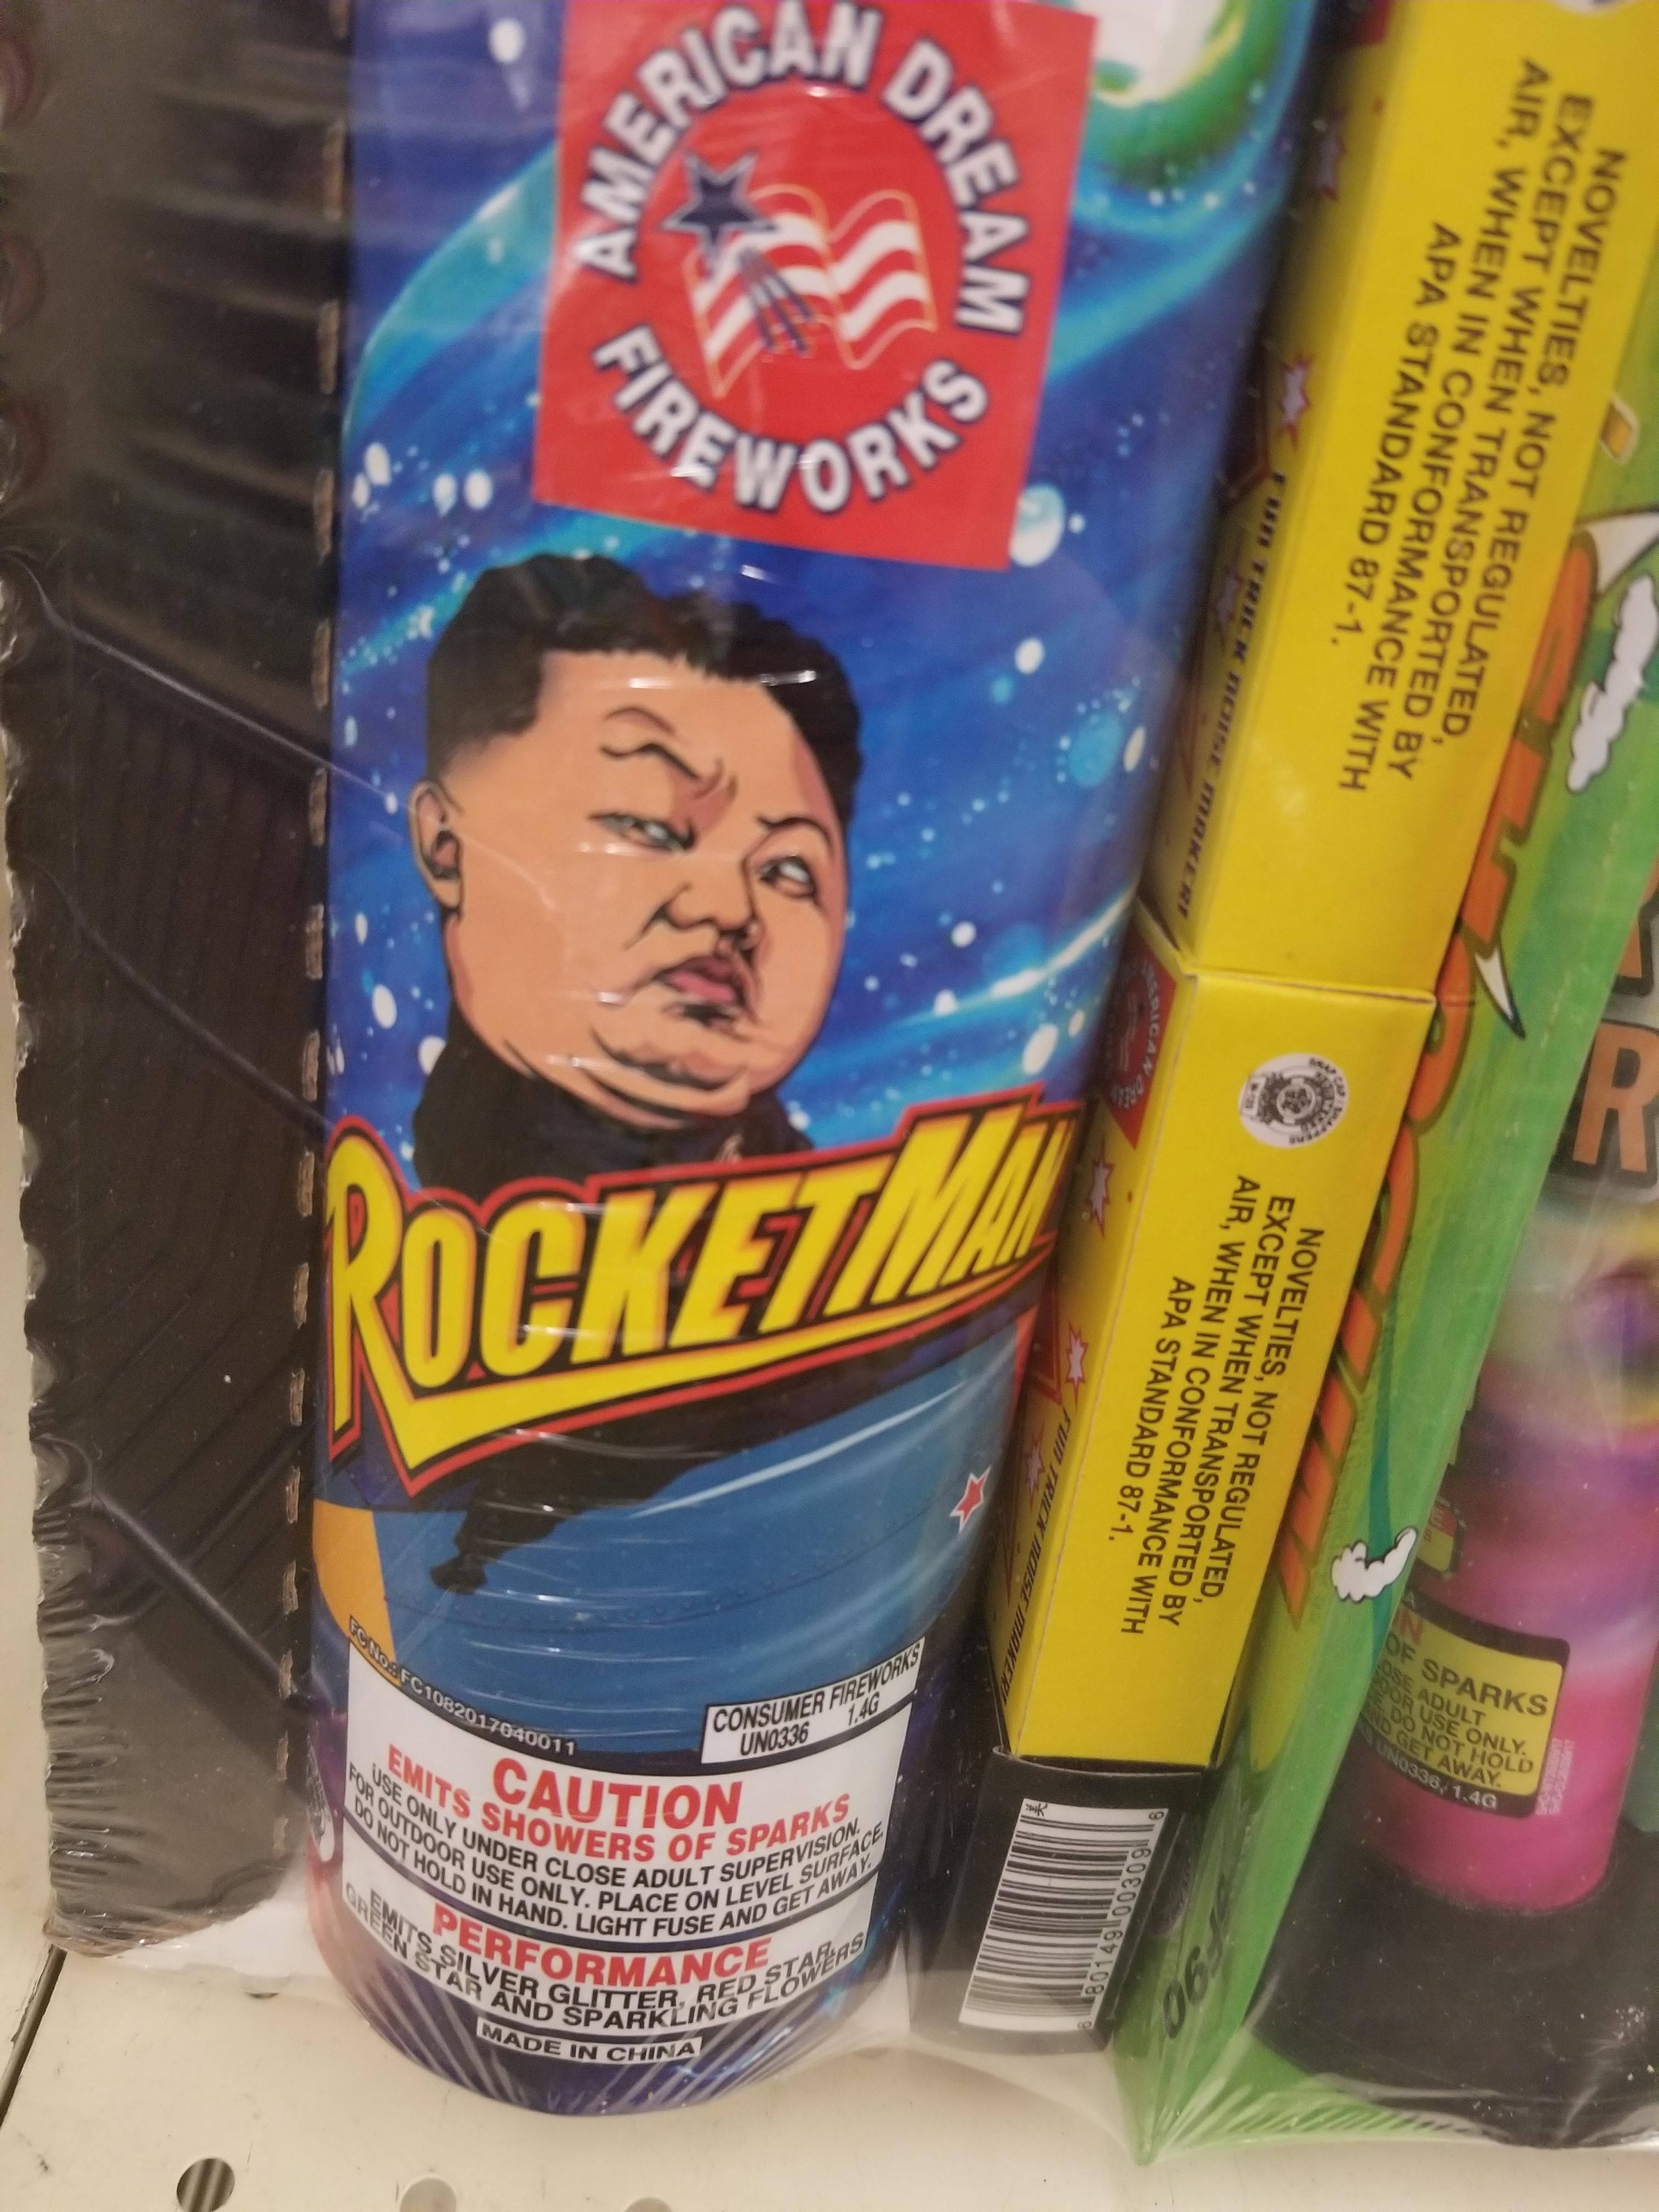 This firework I found today